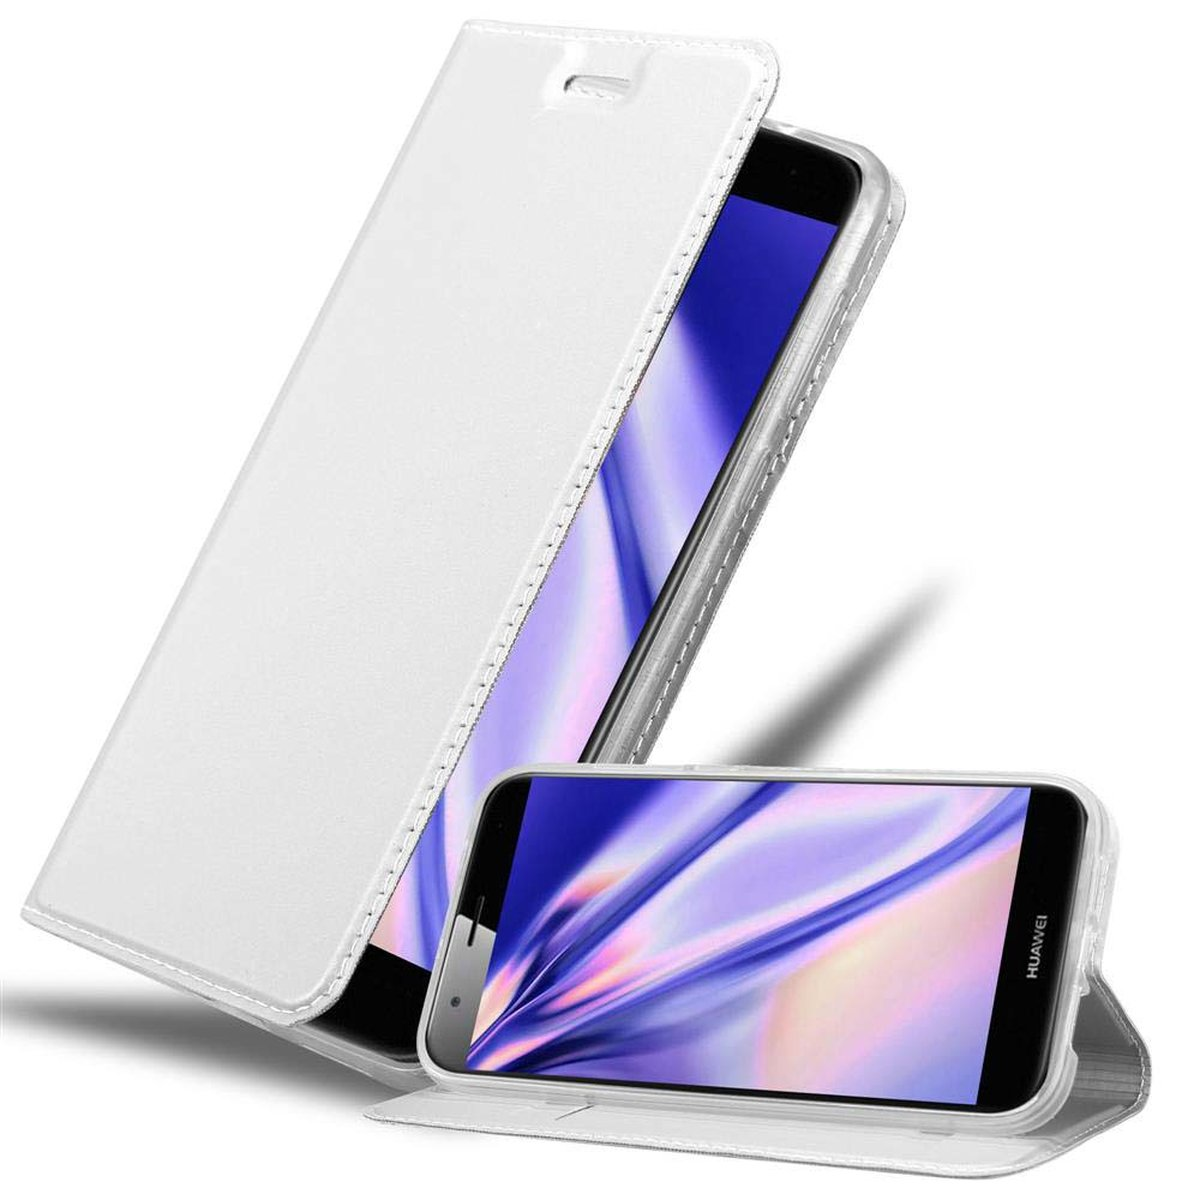 CLASSY Classy G8 / / Huawei, ASCEND G7 Bookcover, PLUS SILBER Style, CADORABO Book GX8, Handyhülle